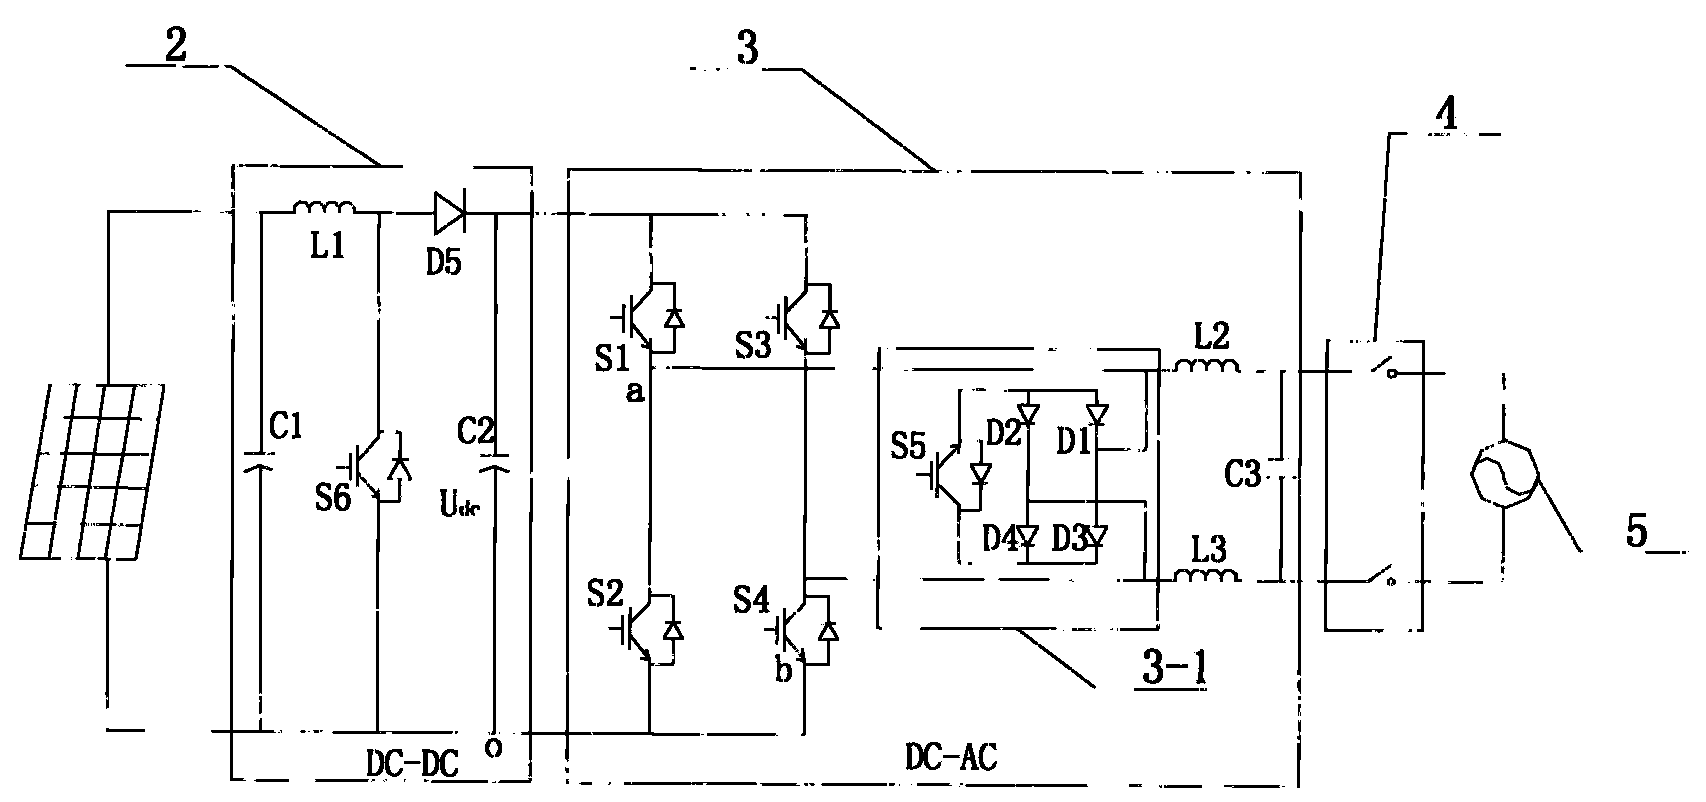 Efficient no-transformer single phase photovoltaic grid-connected inverter